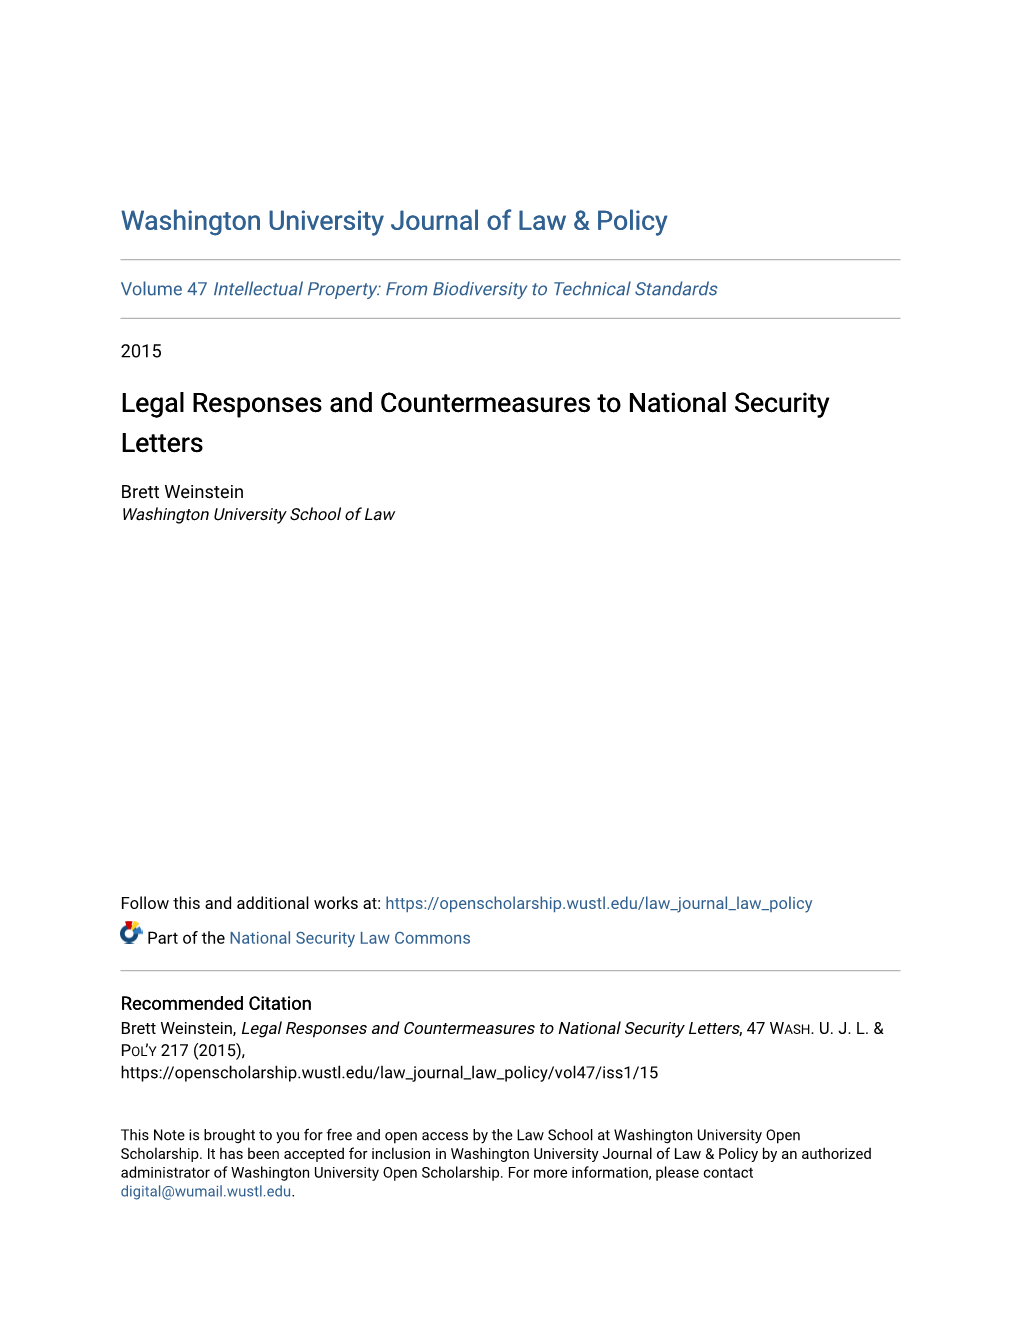 Legal Responses and Countermeasures to National Security Letters